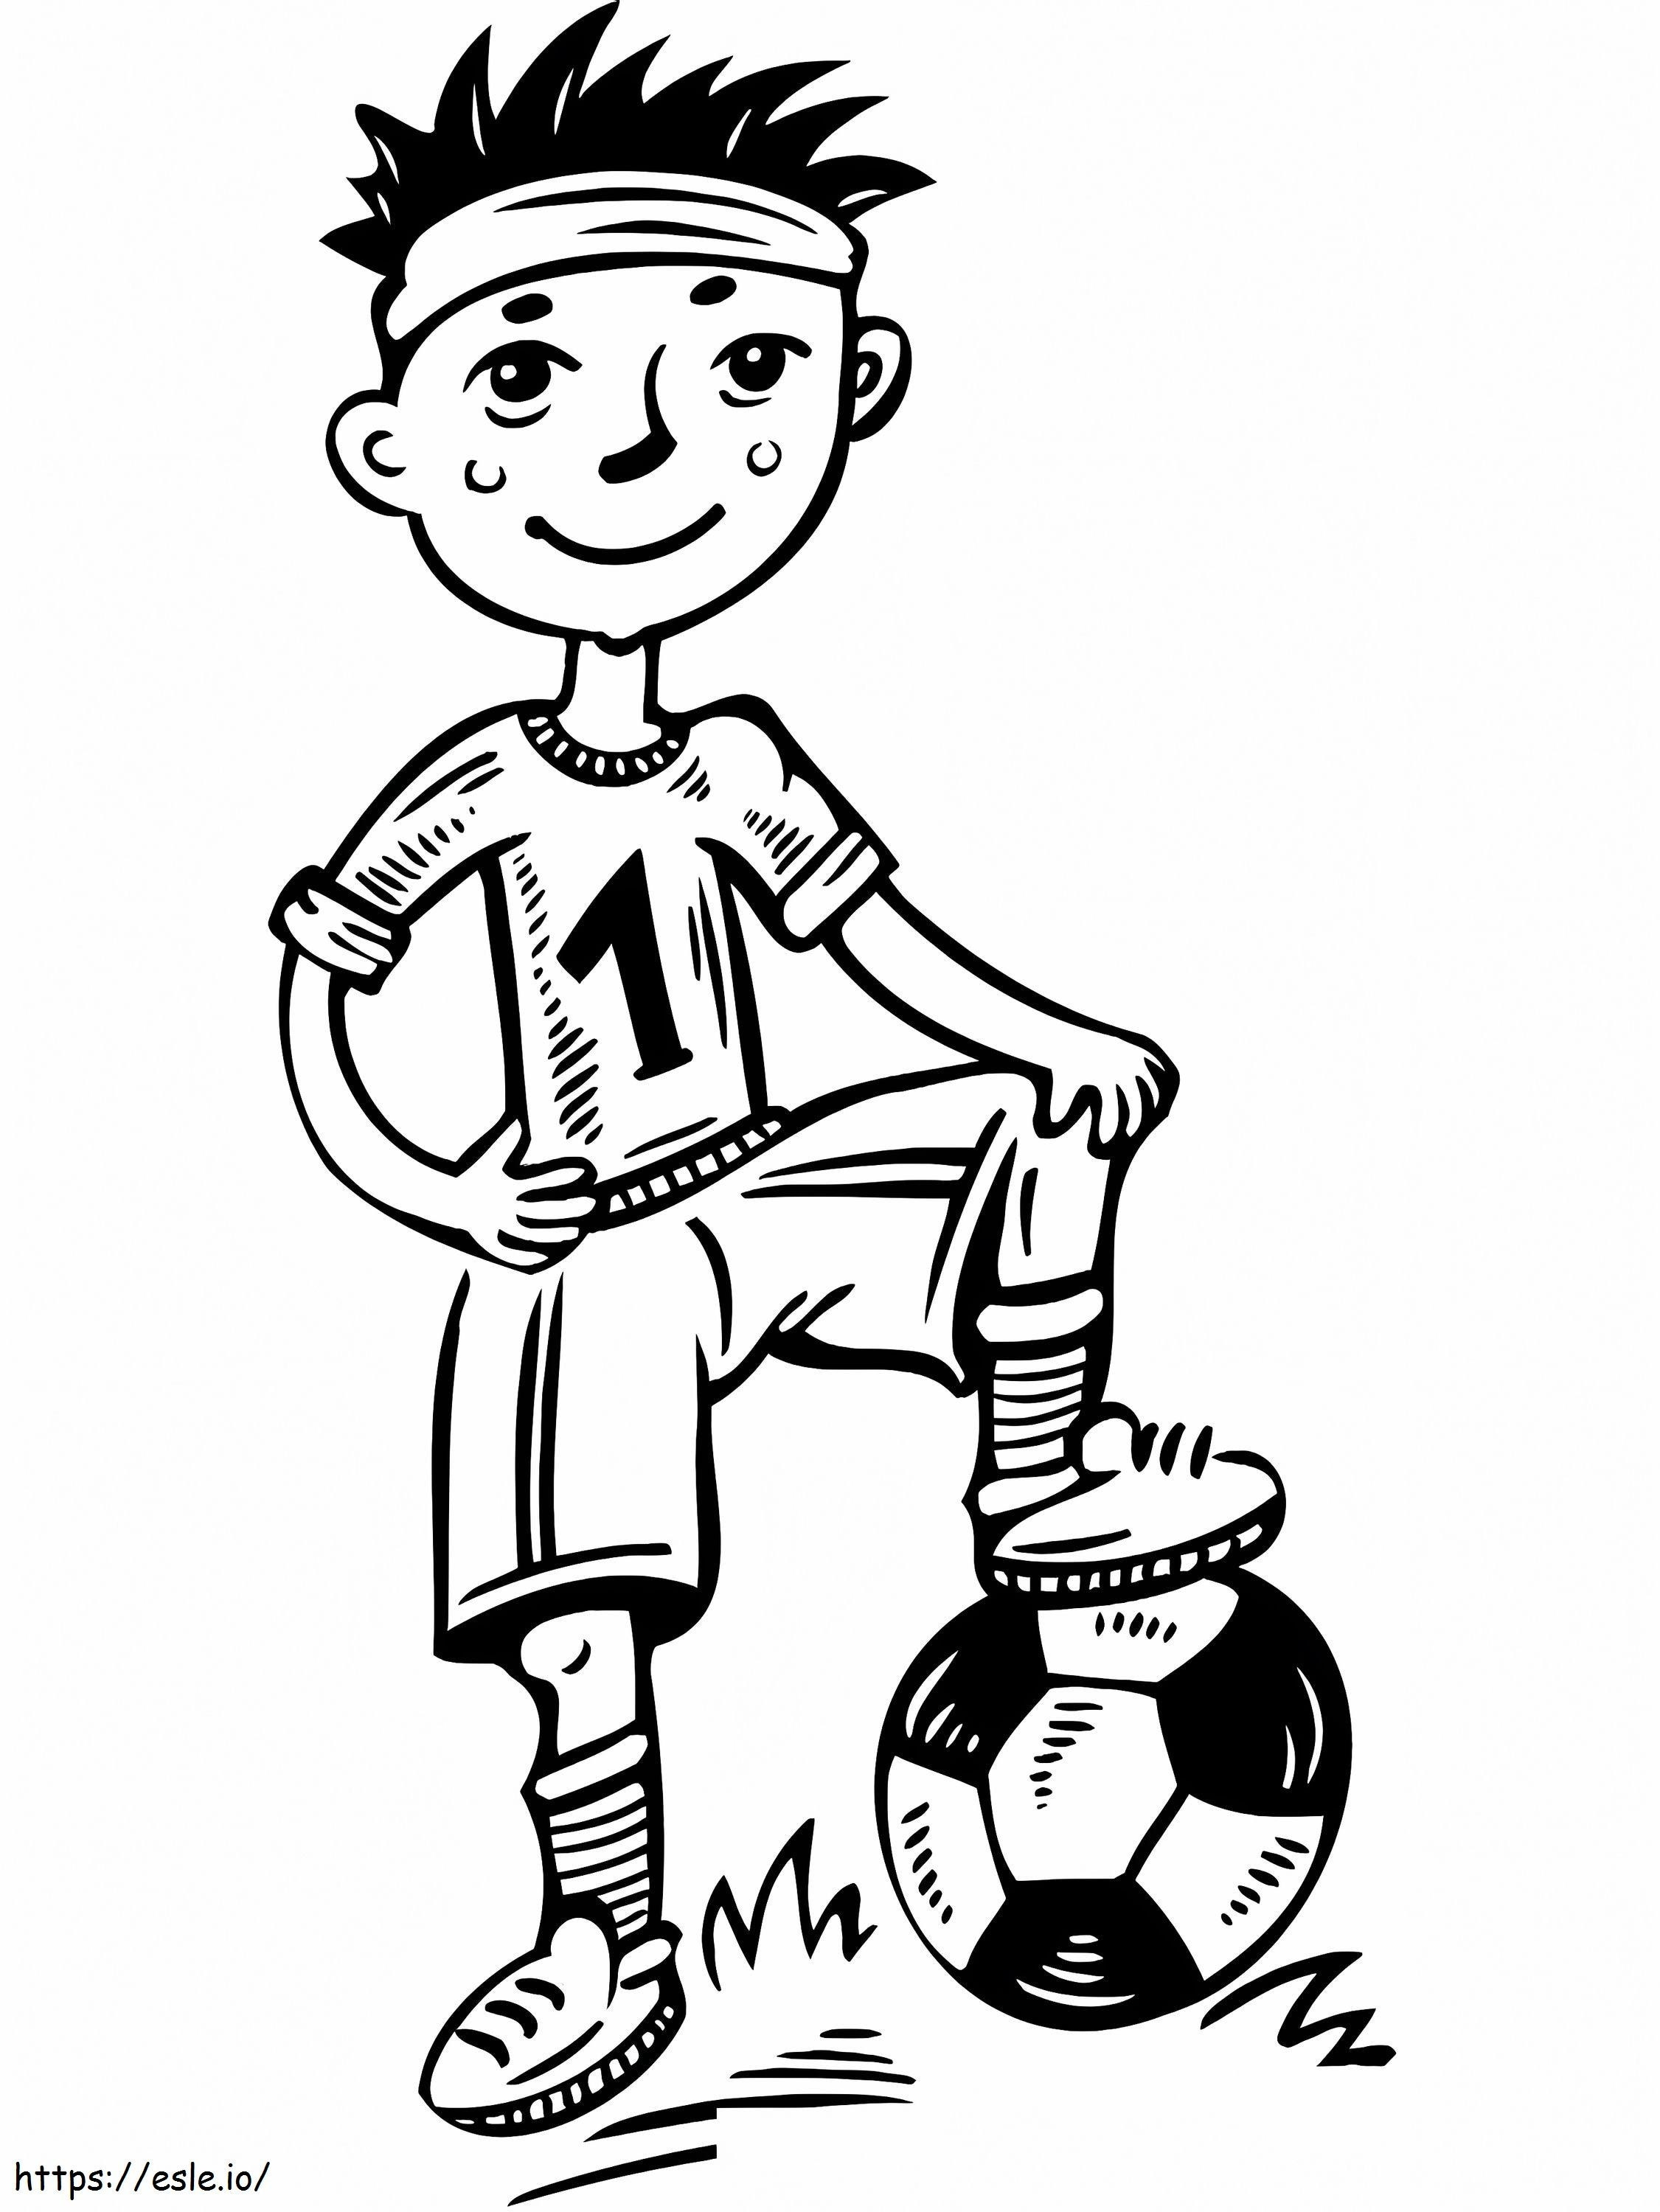 Young Boy Soccer Player coloring page